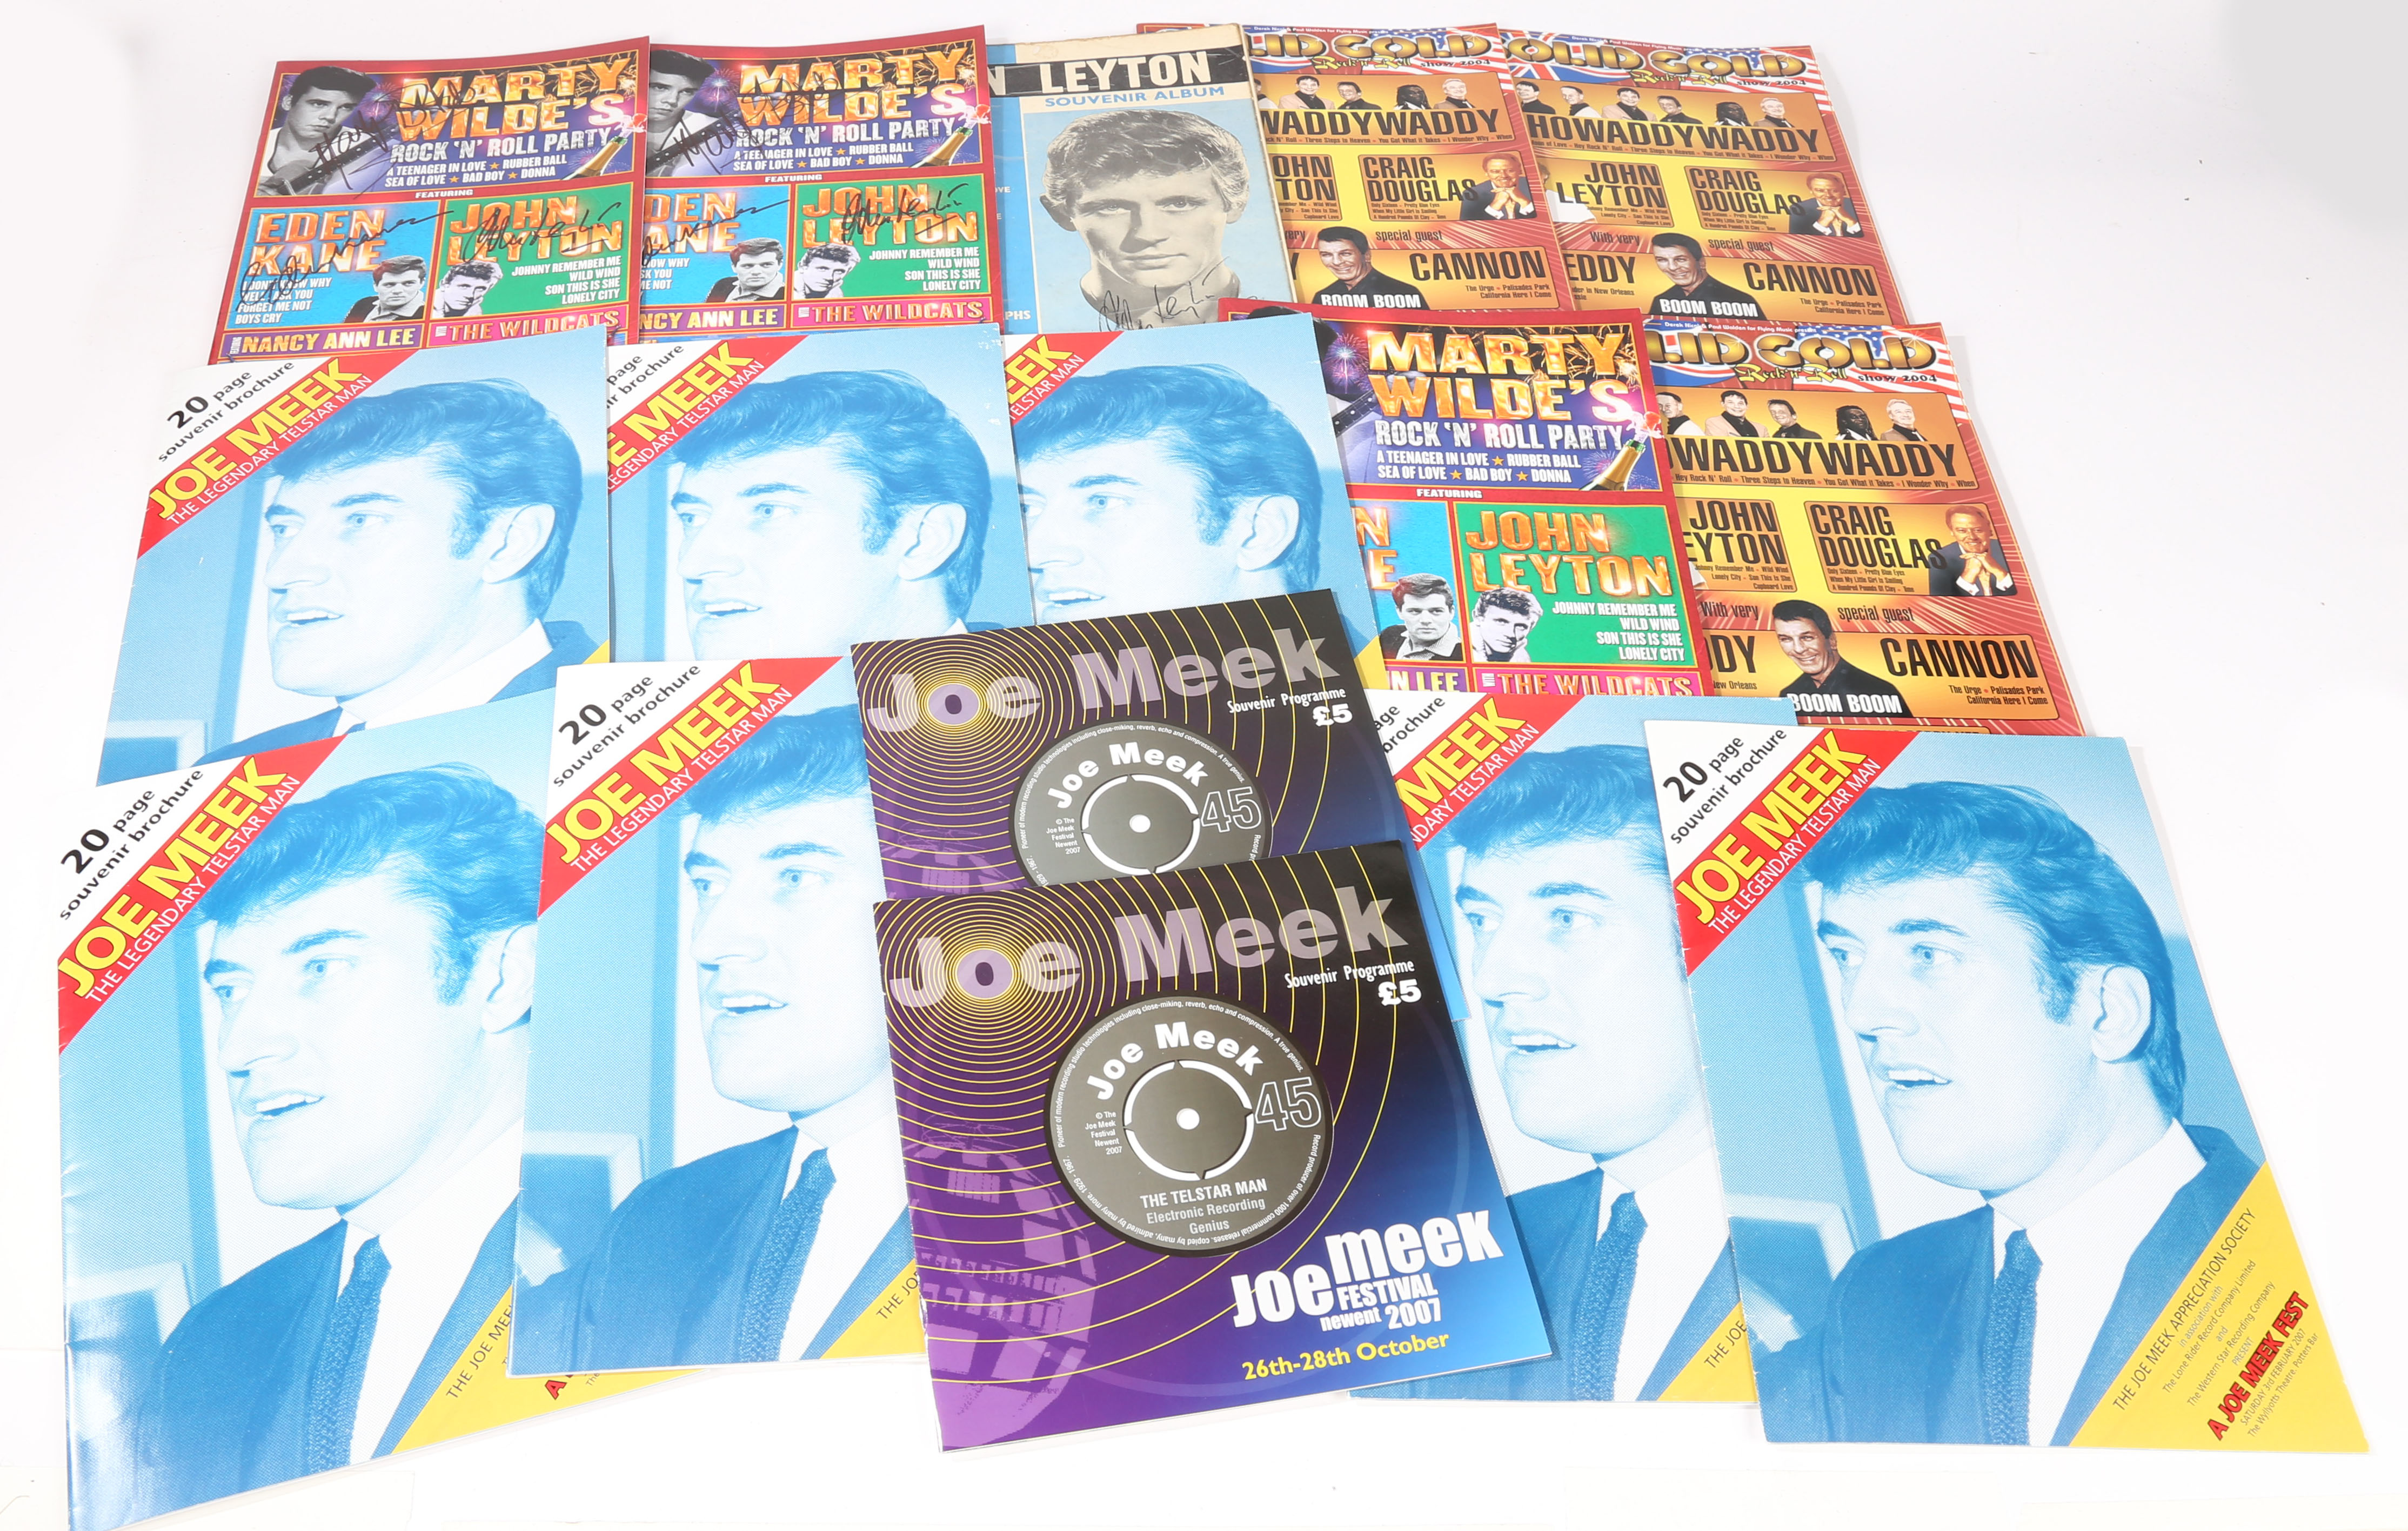 John Leyton. A collection of LPs, 45s, DVDs, and memorabilia relating to the music career of John - Image 8 of 32